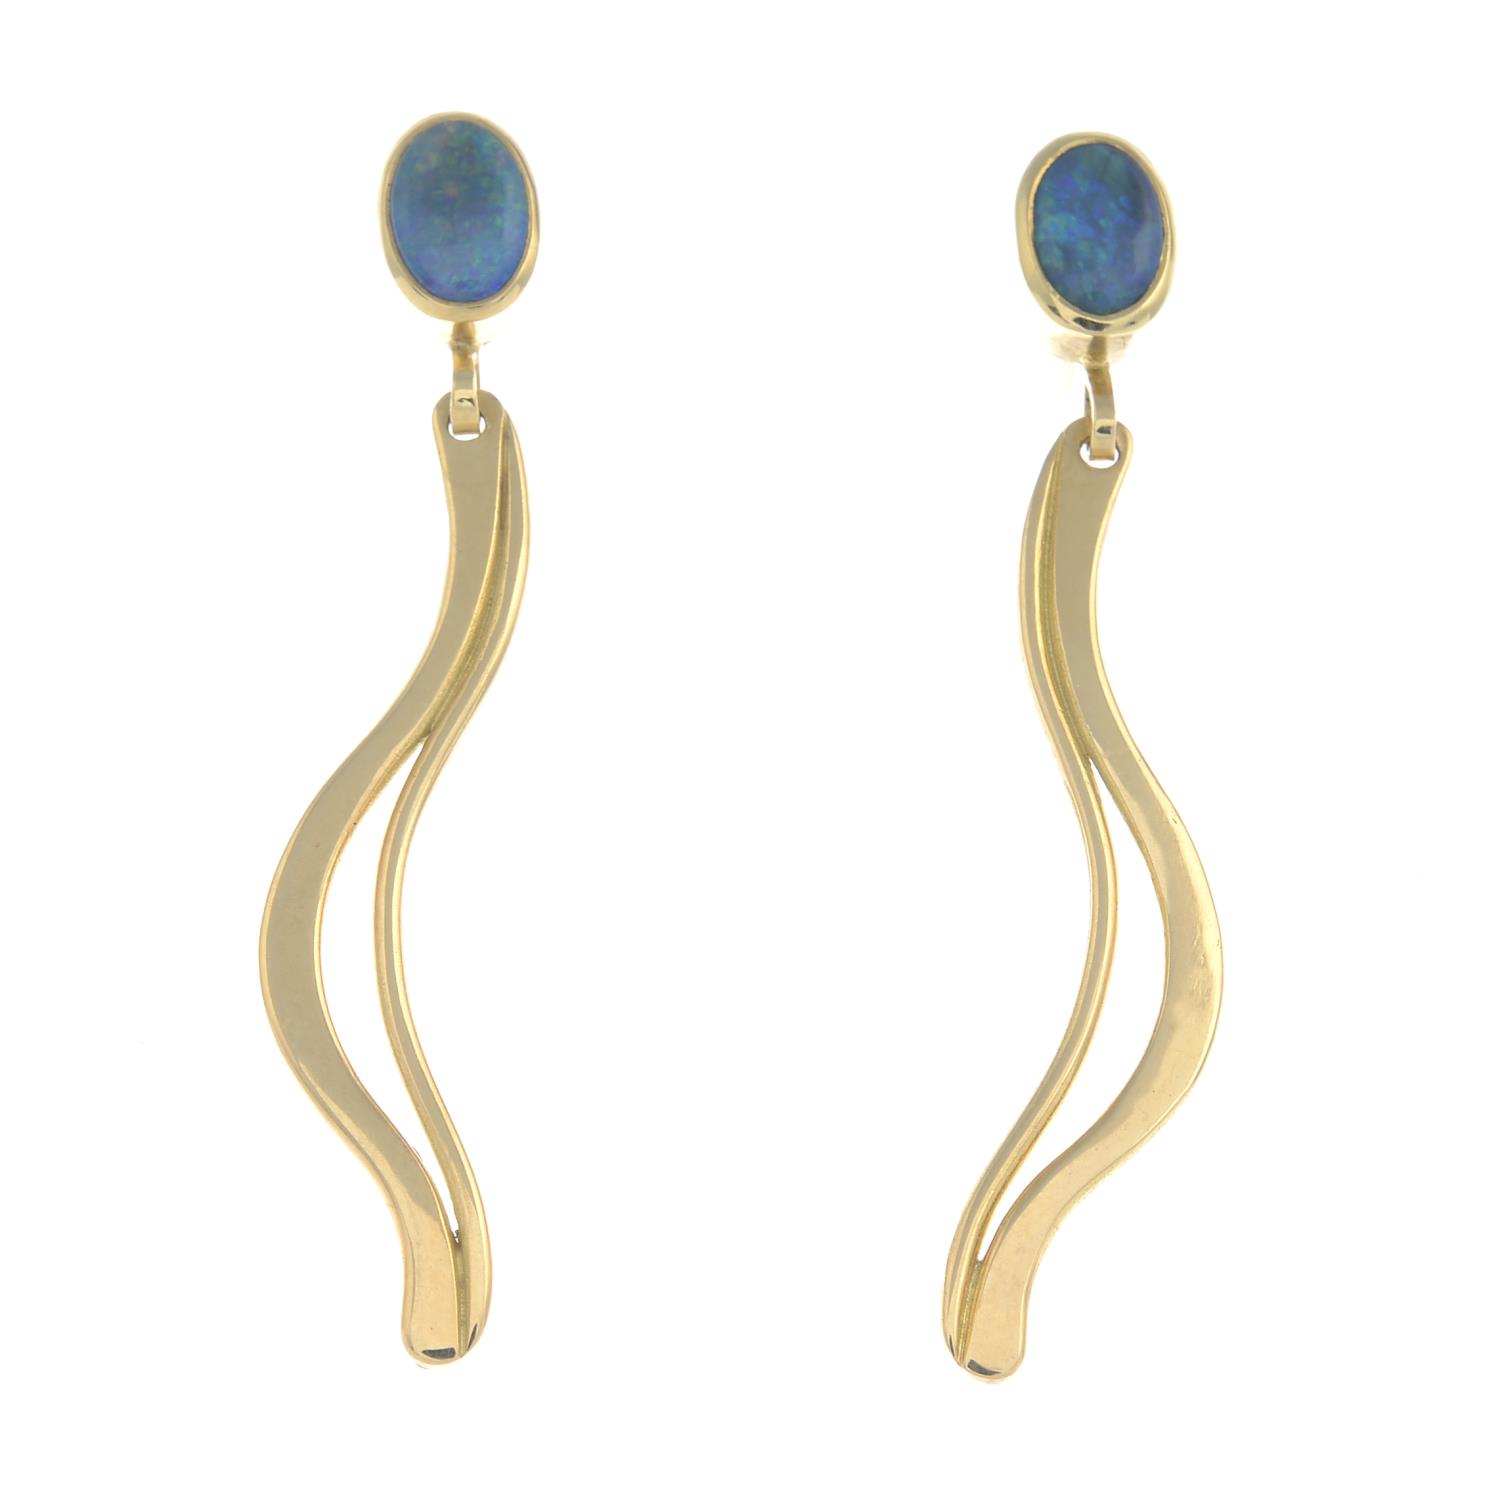 A pair of 18ct gold composite opal earrings.